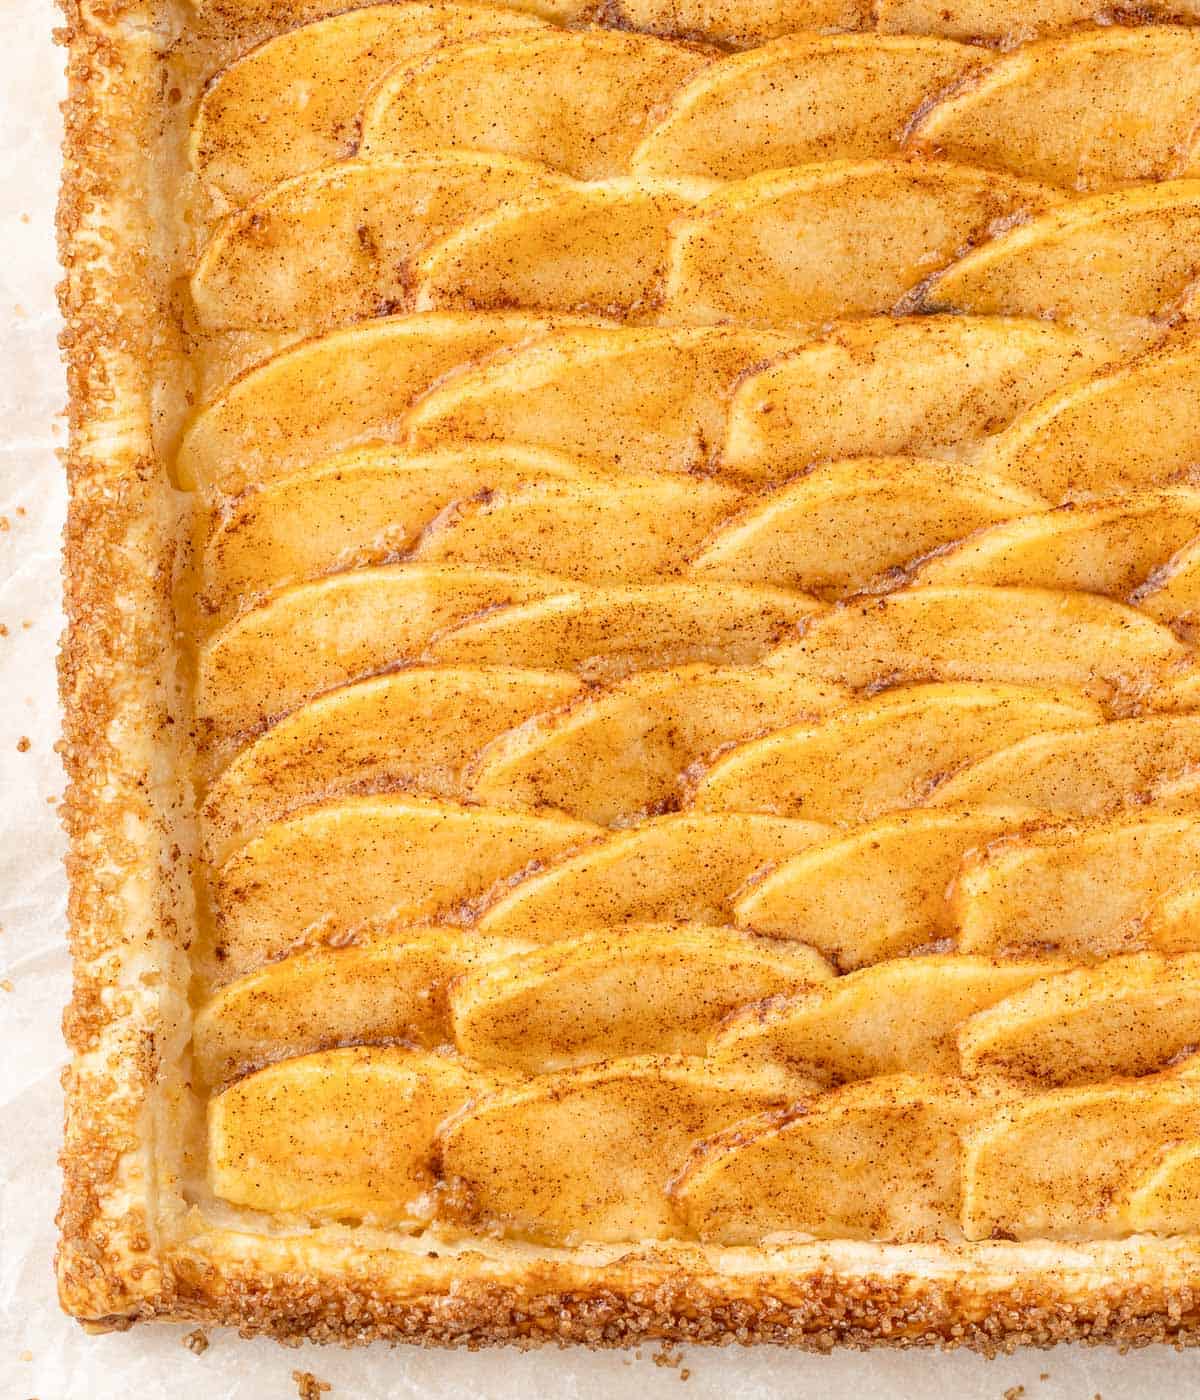 Close up on the tart seen from above.